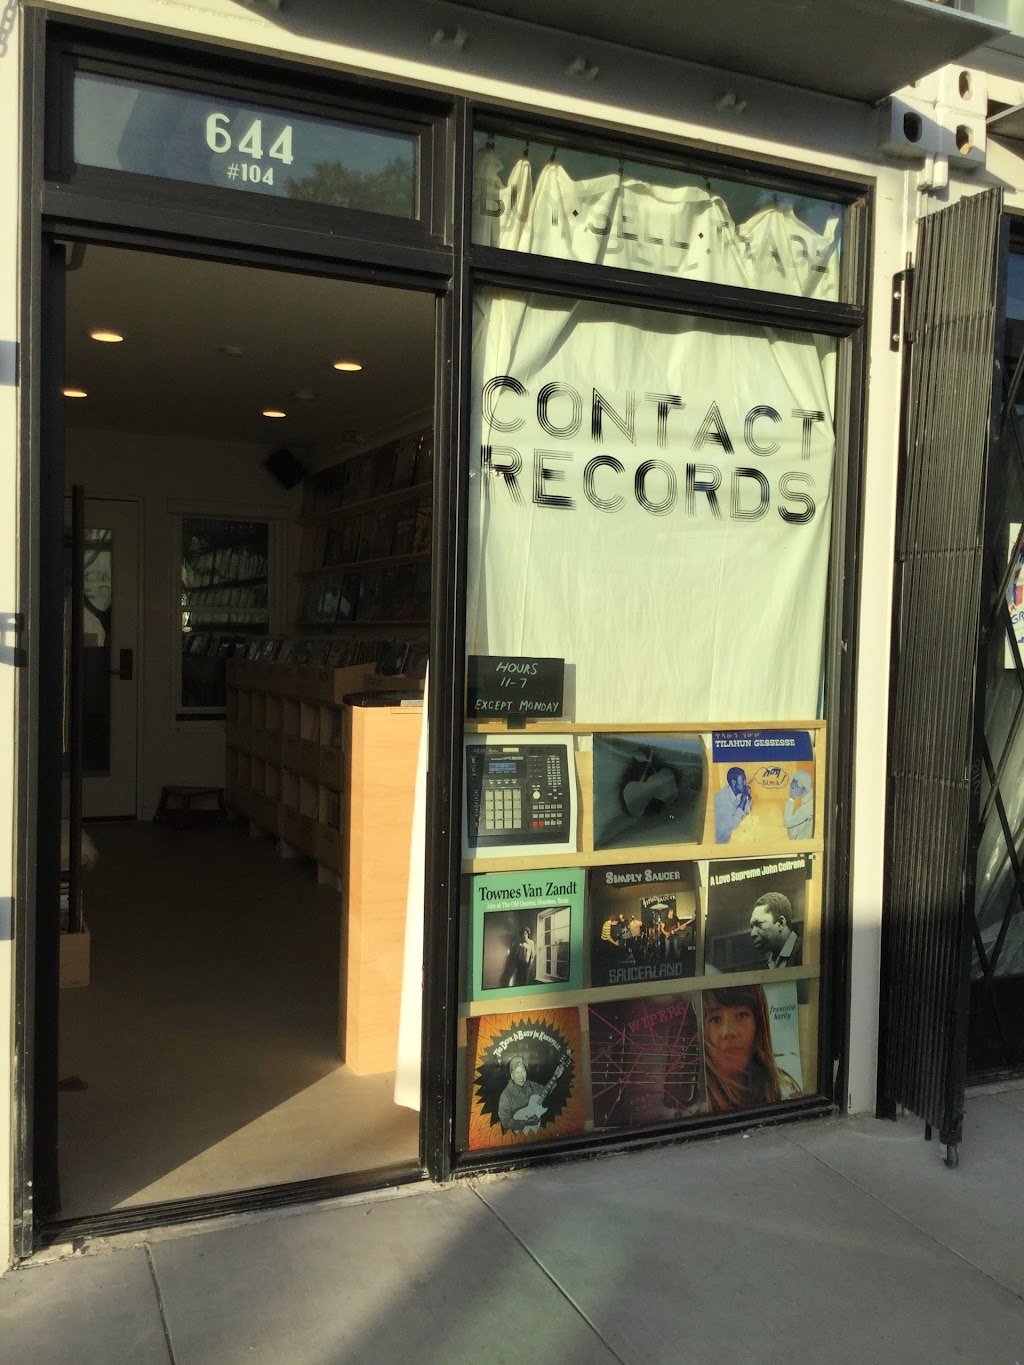 Contact Records | 644 40th St #104, Oakland, CA 94609 | Phone: (510) 891-1536